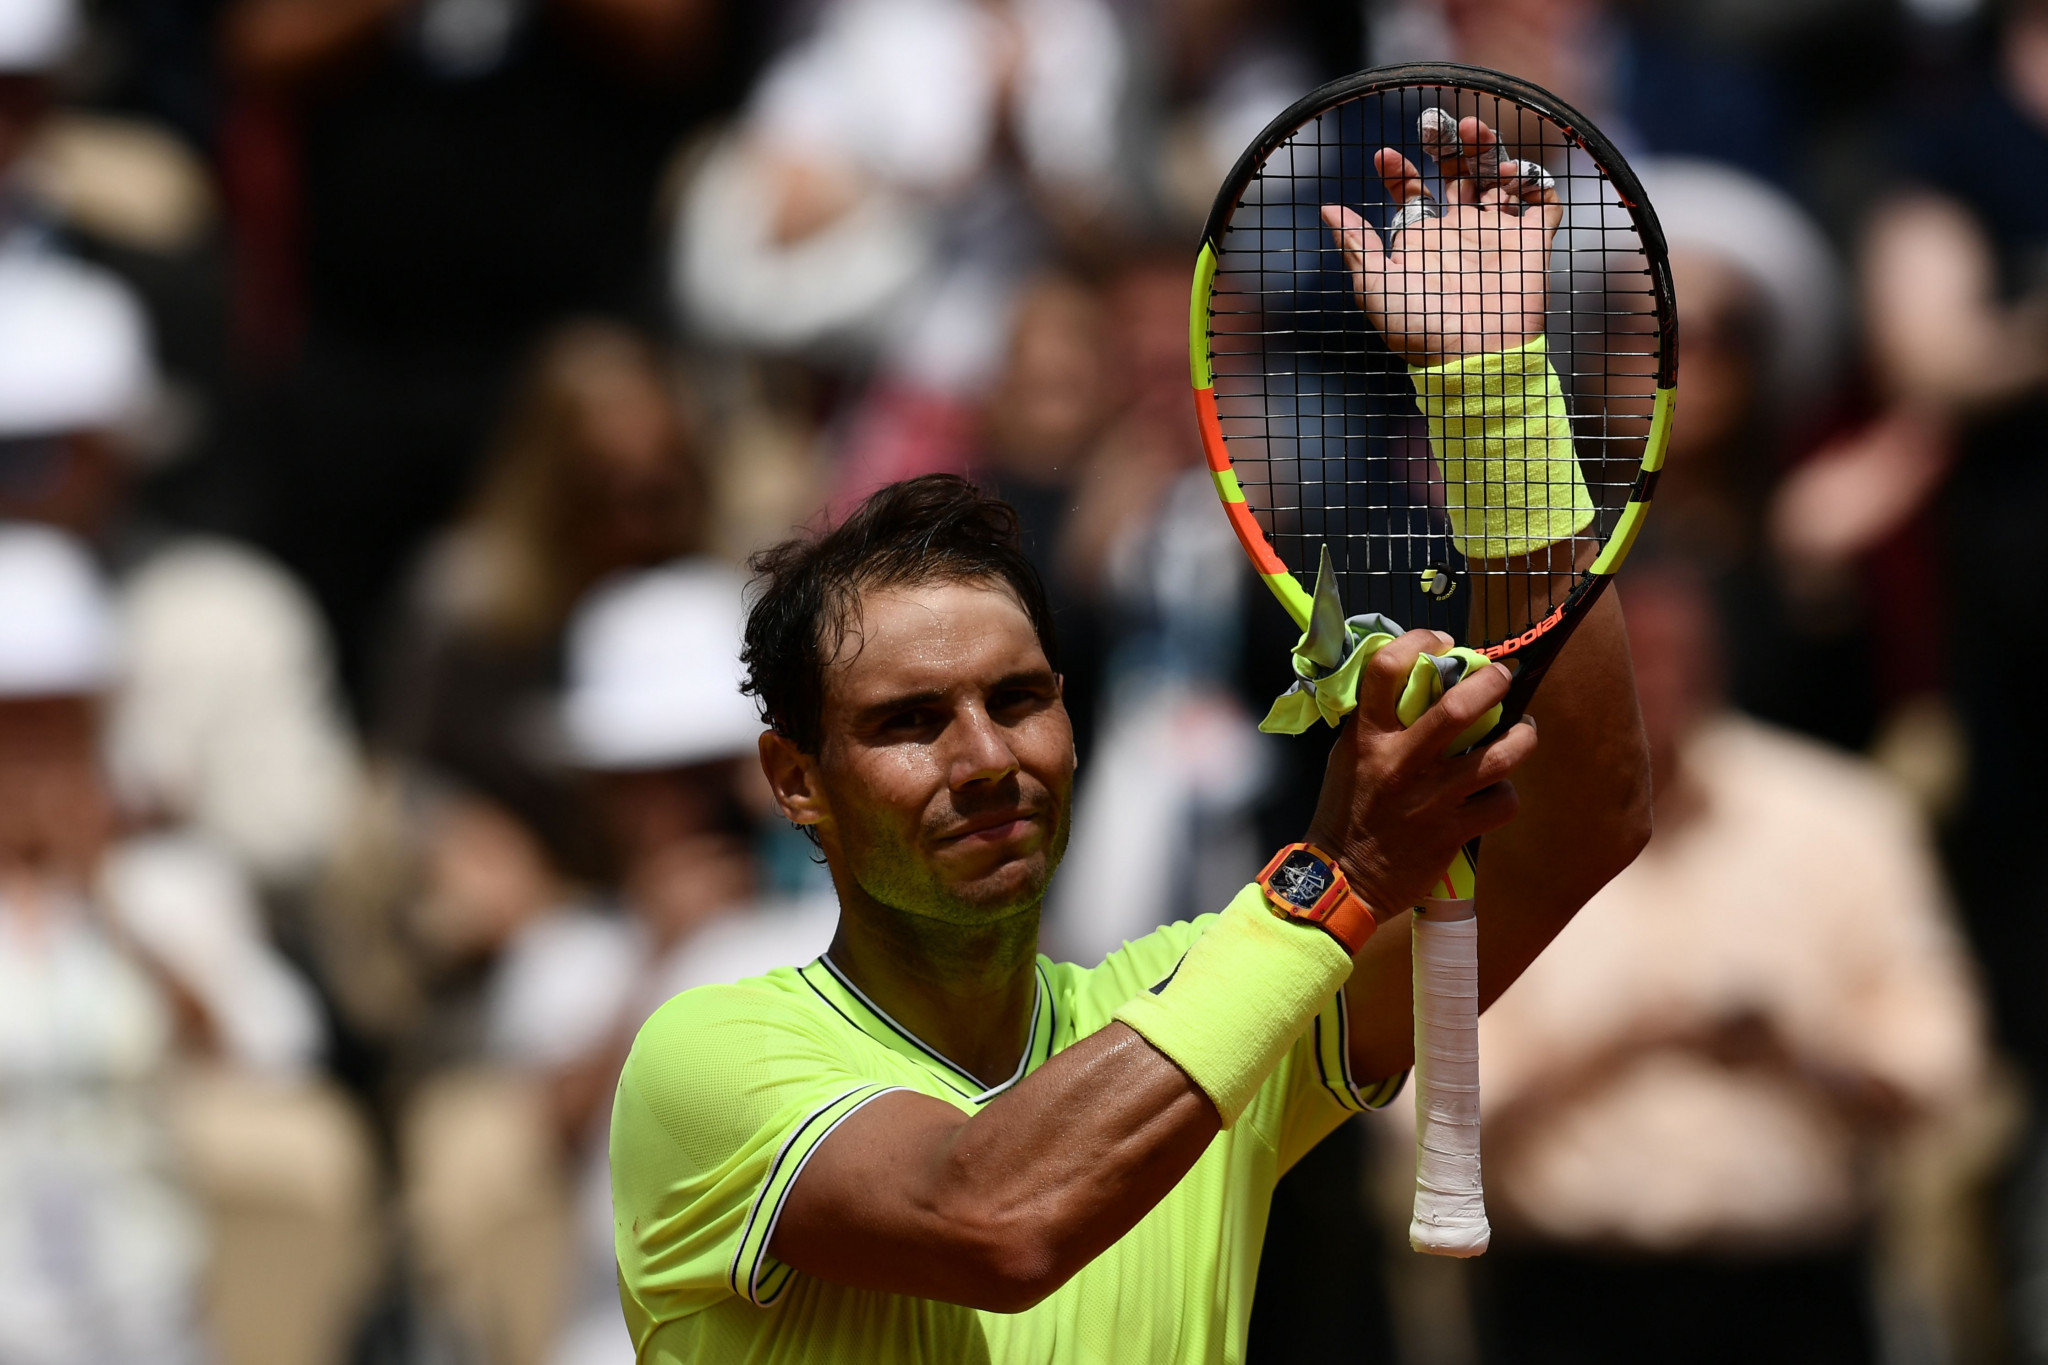 Spain's 11-time French Open champion Rafa Nadal was a predictably easy winner against Germany's world number 114 Yannick Maden ©Getty Images